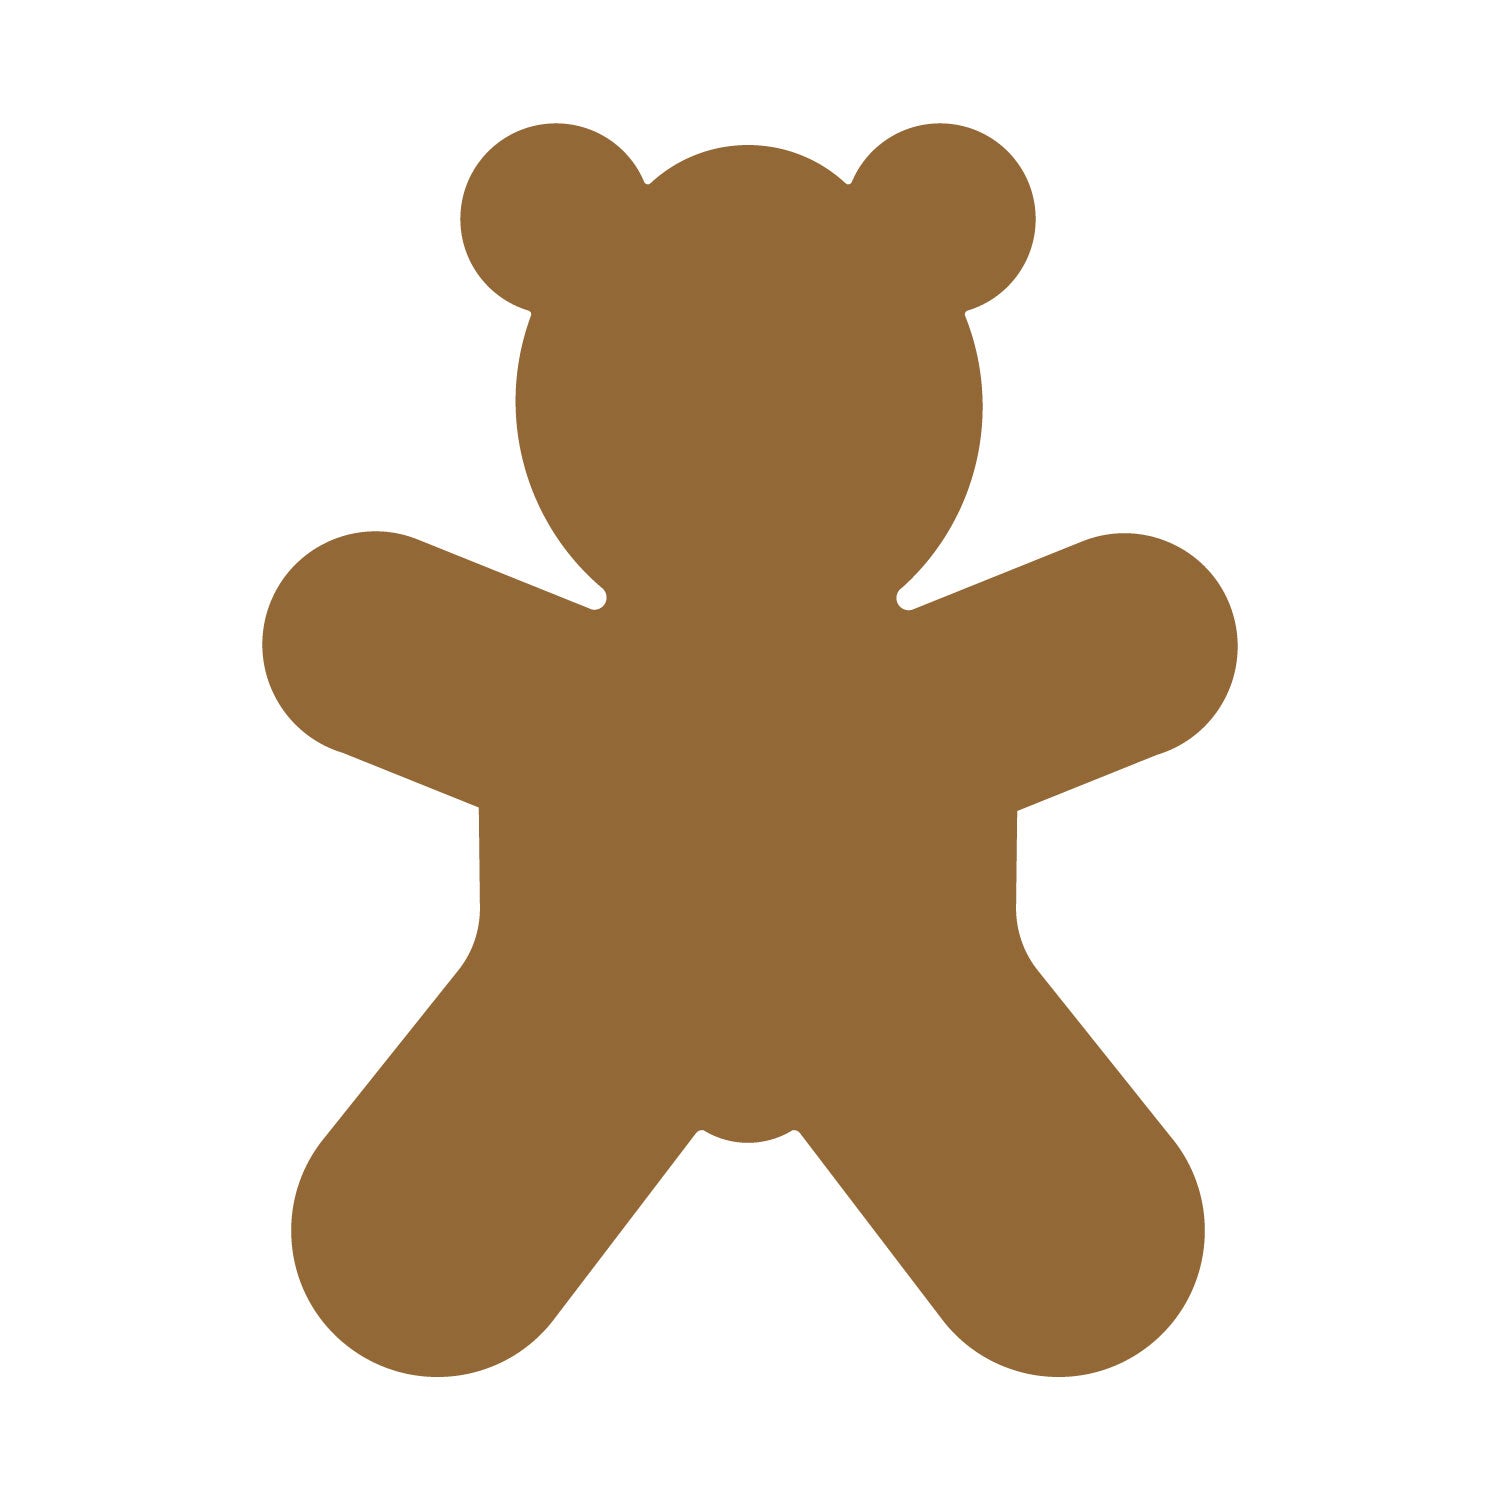 Mini Teddy Bear / Mouse 2 Cookie Cutter